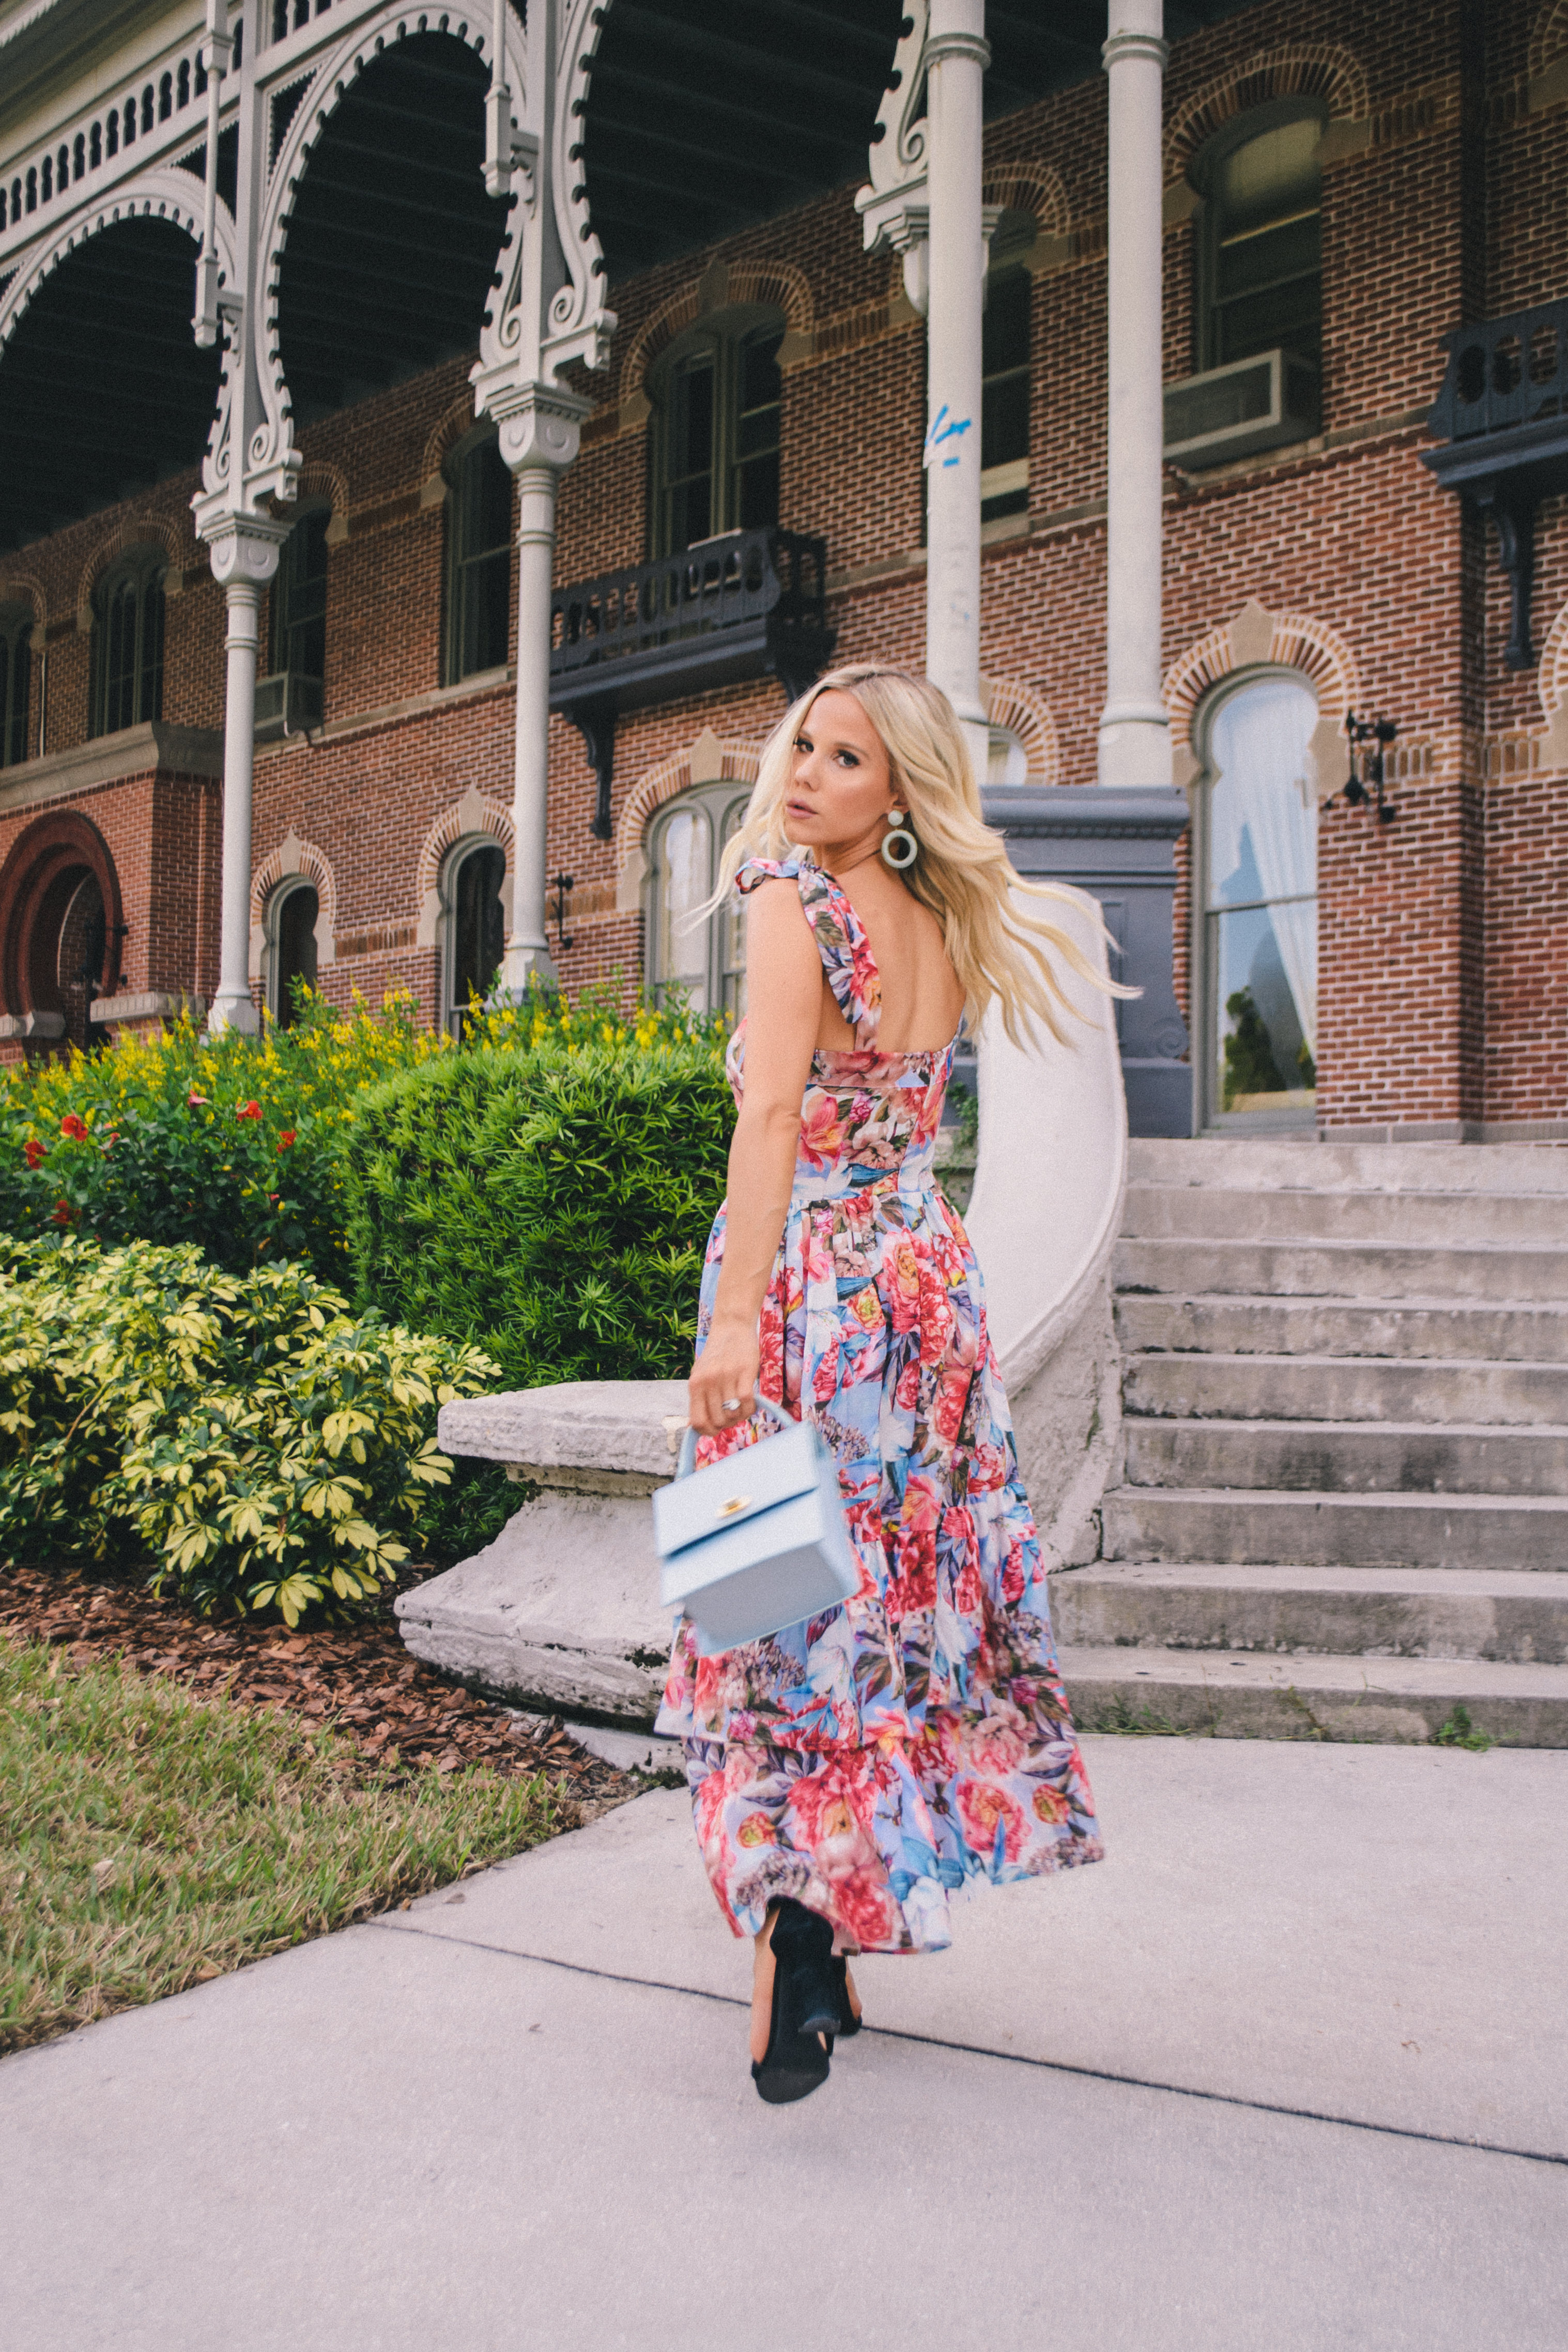 tropical destination vacation style in a floral ruffle hem midi dress by Hannah McDonnell of Glam Life Living #vacationstyle #tropicalstyle #vacationoutfit